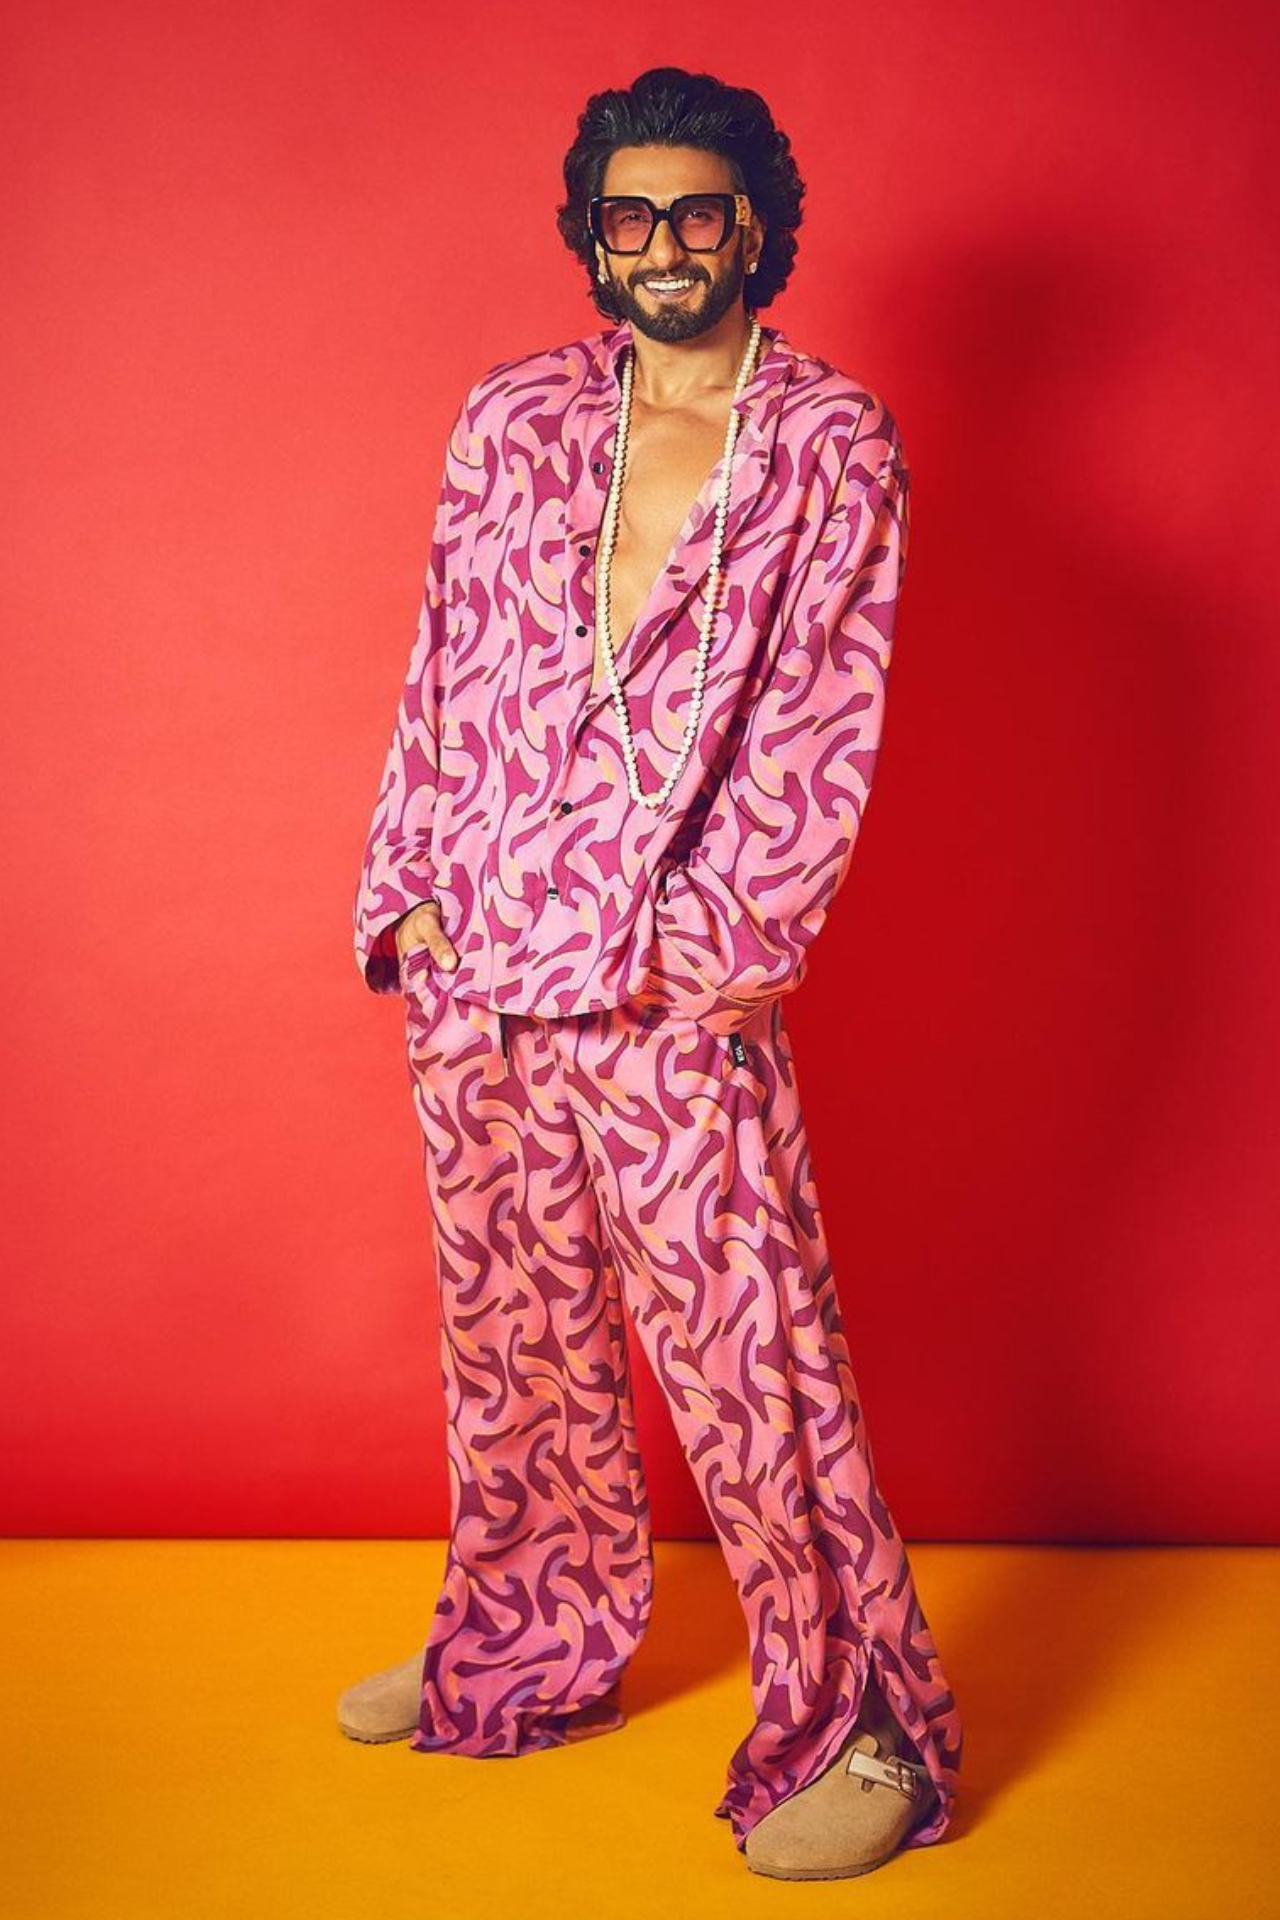 Ranveer Singh steals hearts in a pink suit at Forbes awards